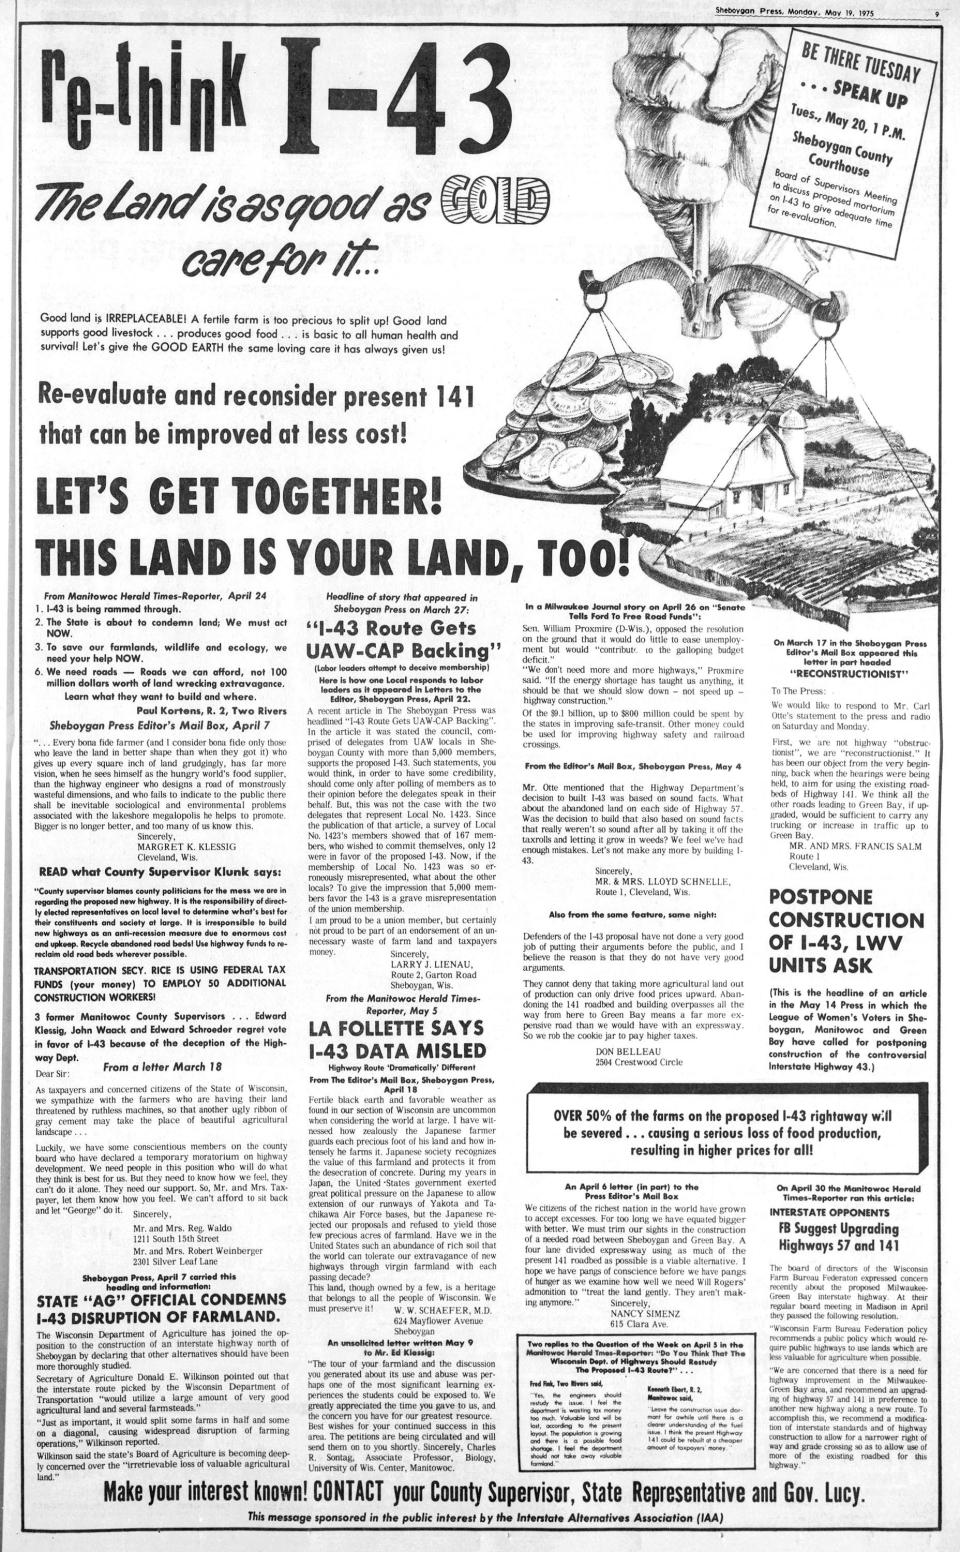 FILE - The group protesting Interstate 43 proposed location took out a full page in The Sheboygan Press, May 19, 1975, detailing the situation from their point of view.